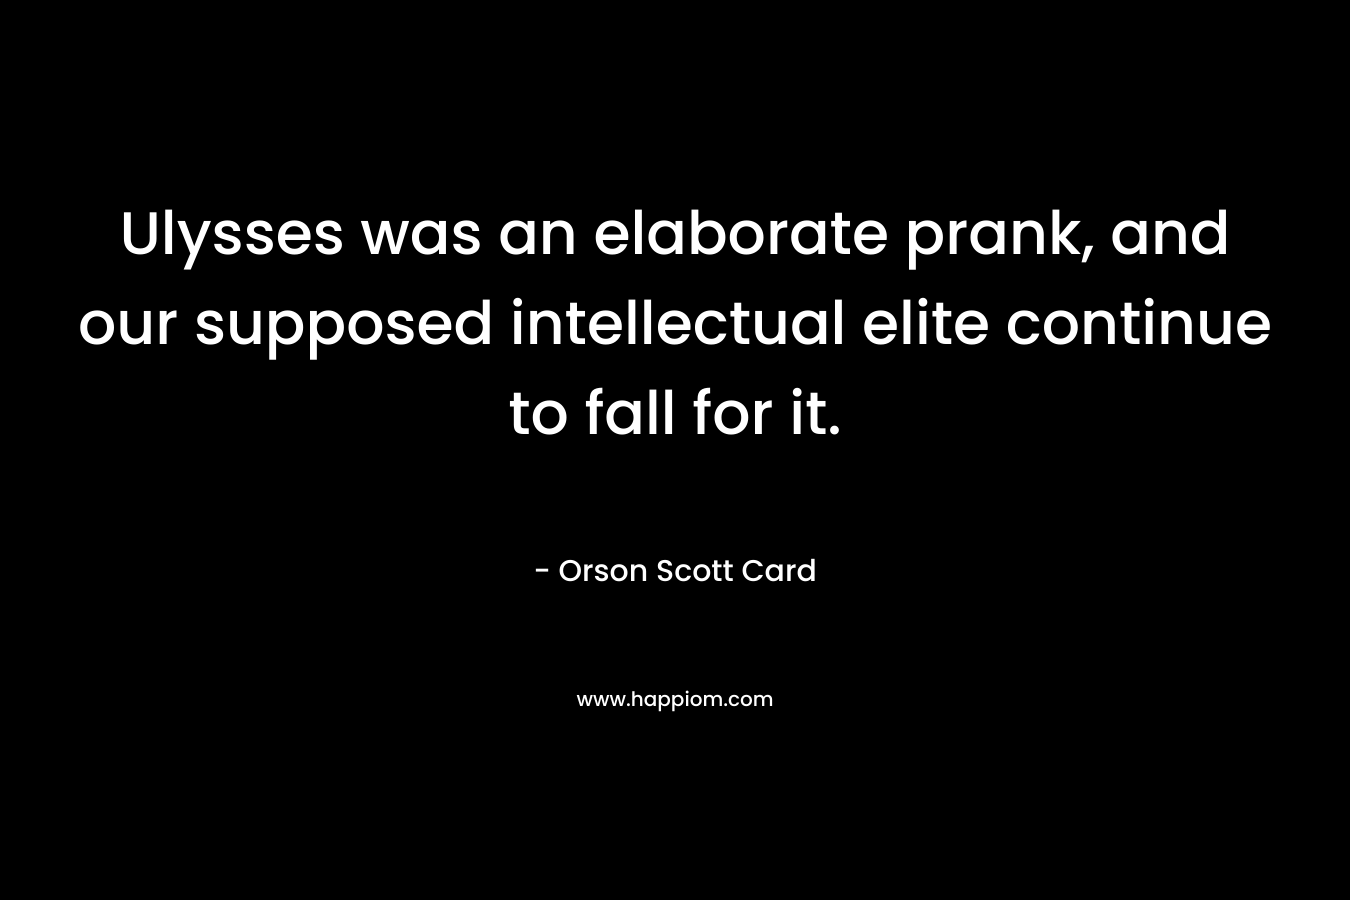 Ulysses was an elaborate prank, and our supposed intellectual elite continue to fall for it. – Orson Scott Card